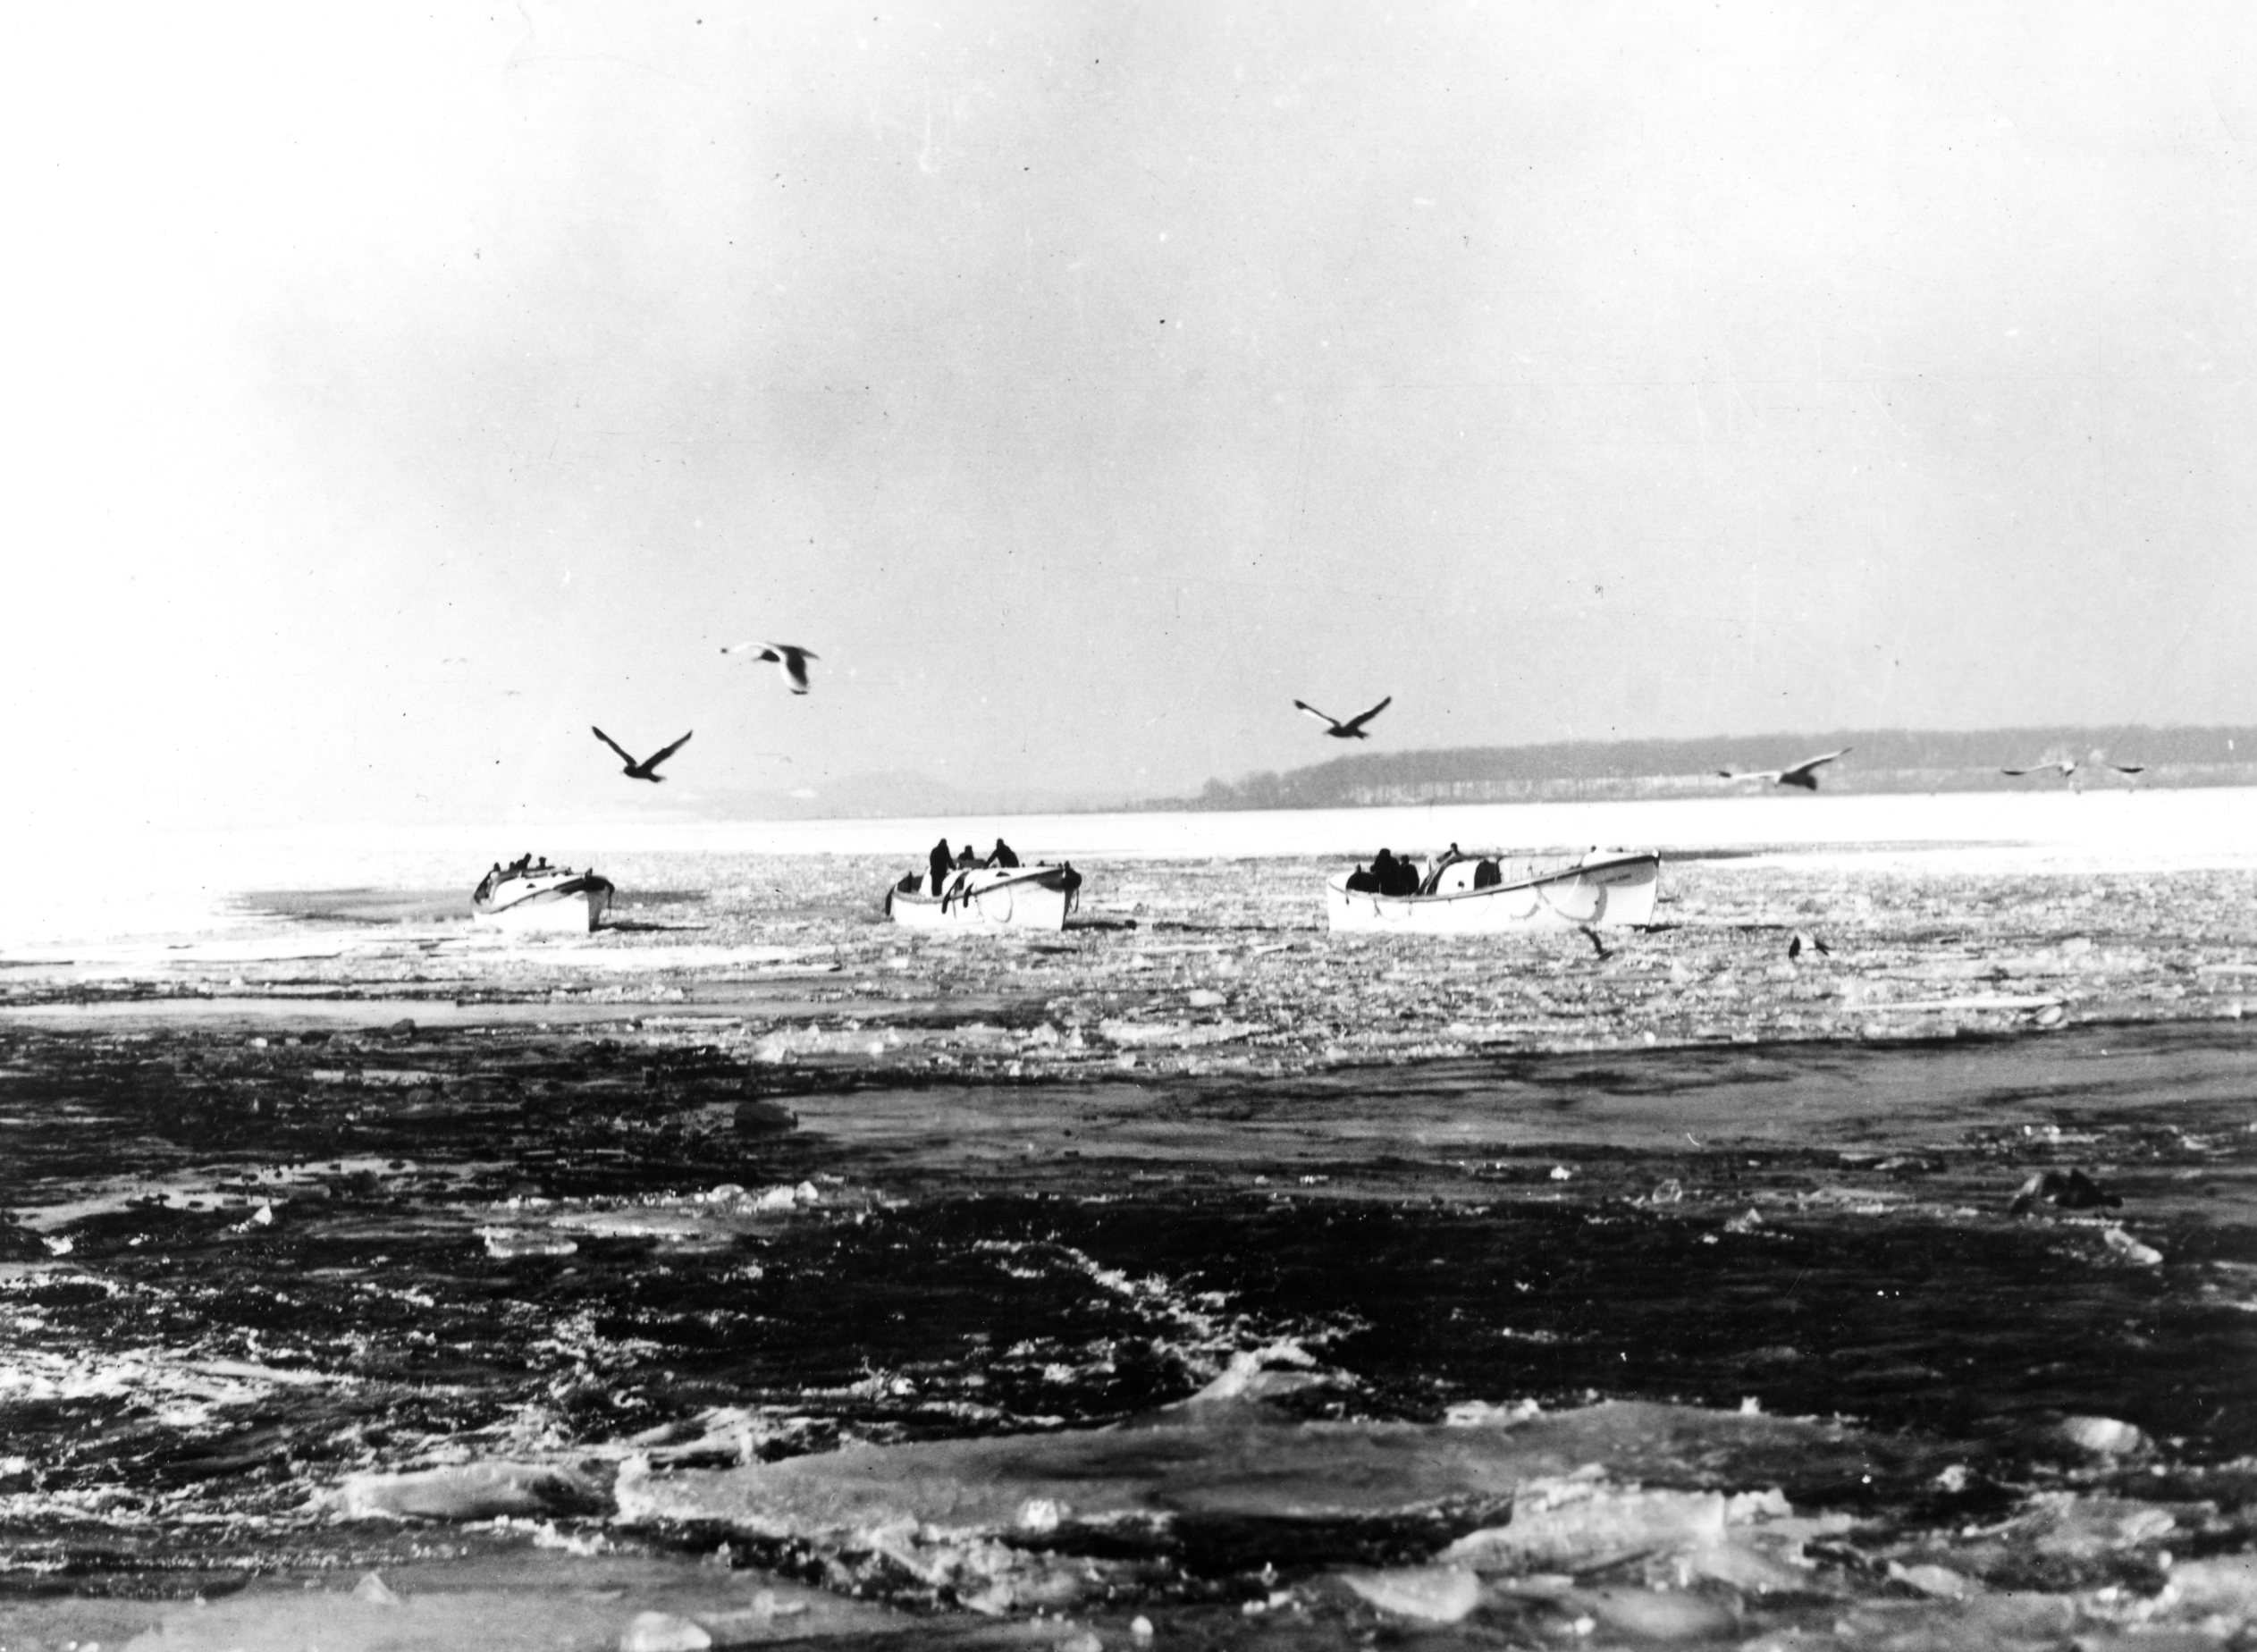 Coast Guard motor lifeboats encounter the hazard of floating ice on the flooded Ohio River in 1937. (U.S. Coast Guard)